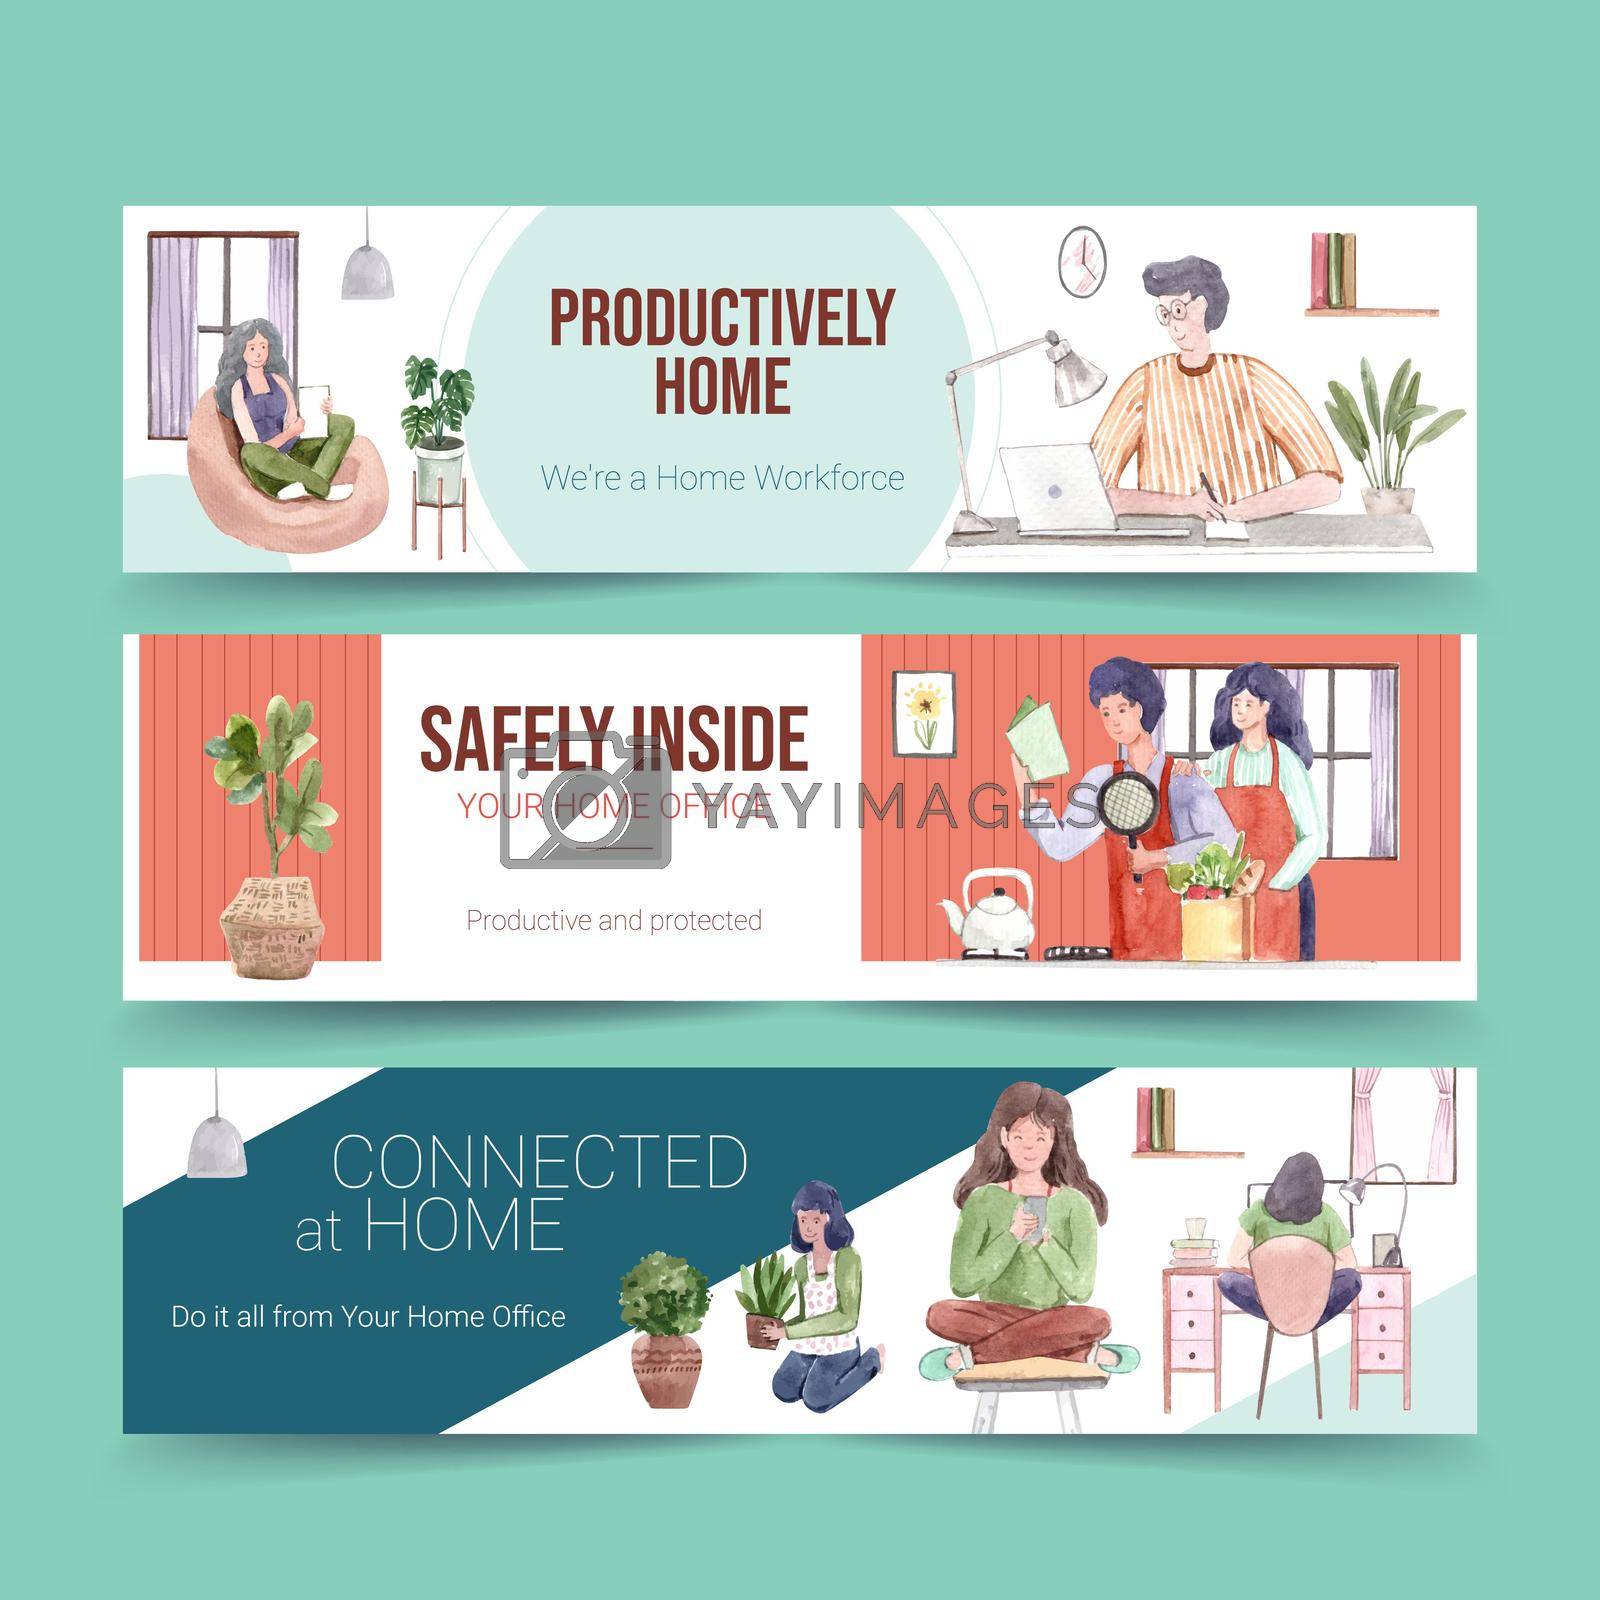 Royalty free image of people are working from home with laptops, PC at table, at sofa. Home office banner concept watercolor illustration by Photographeeasia